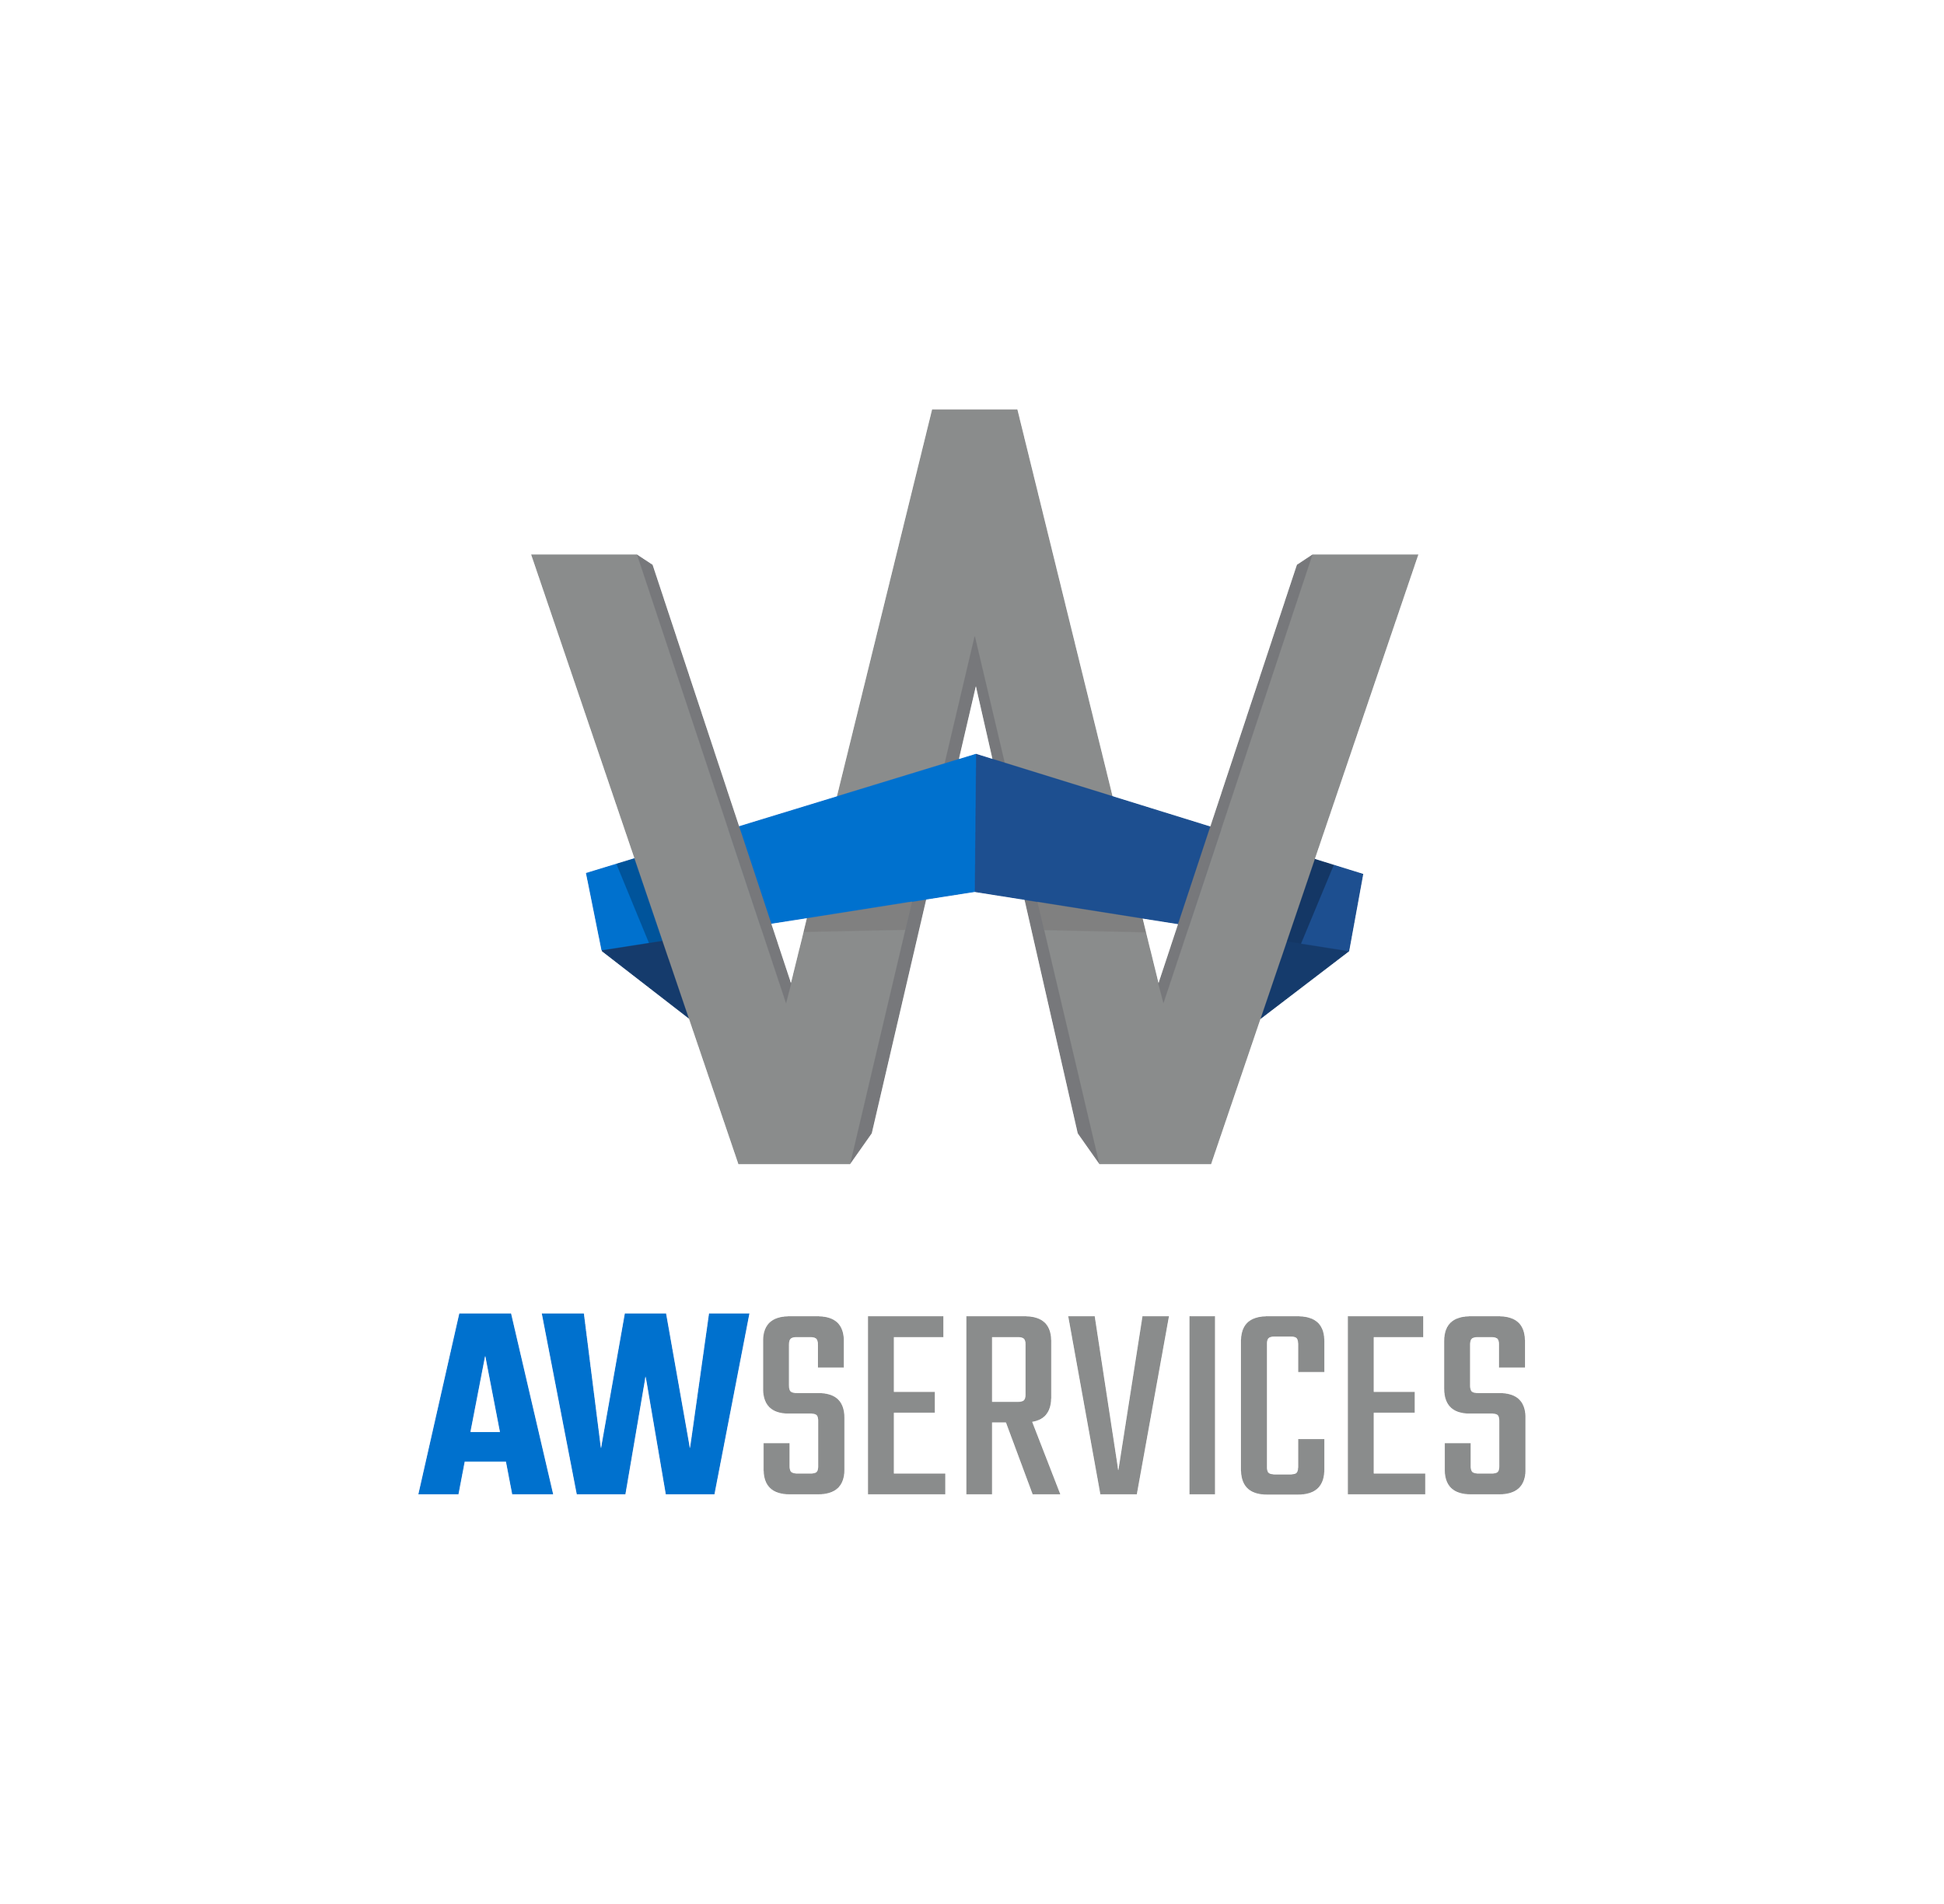 AW Services